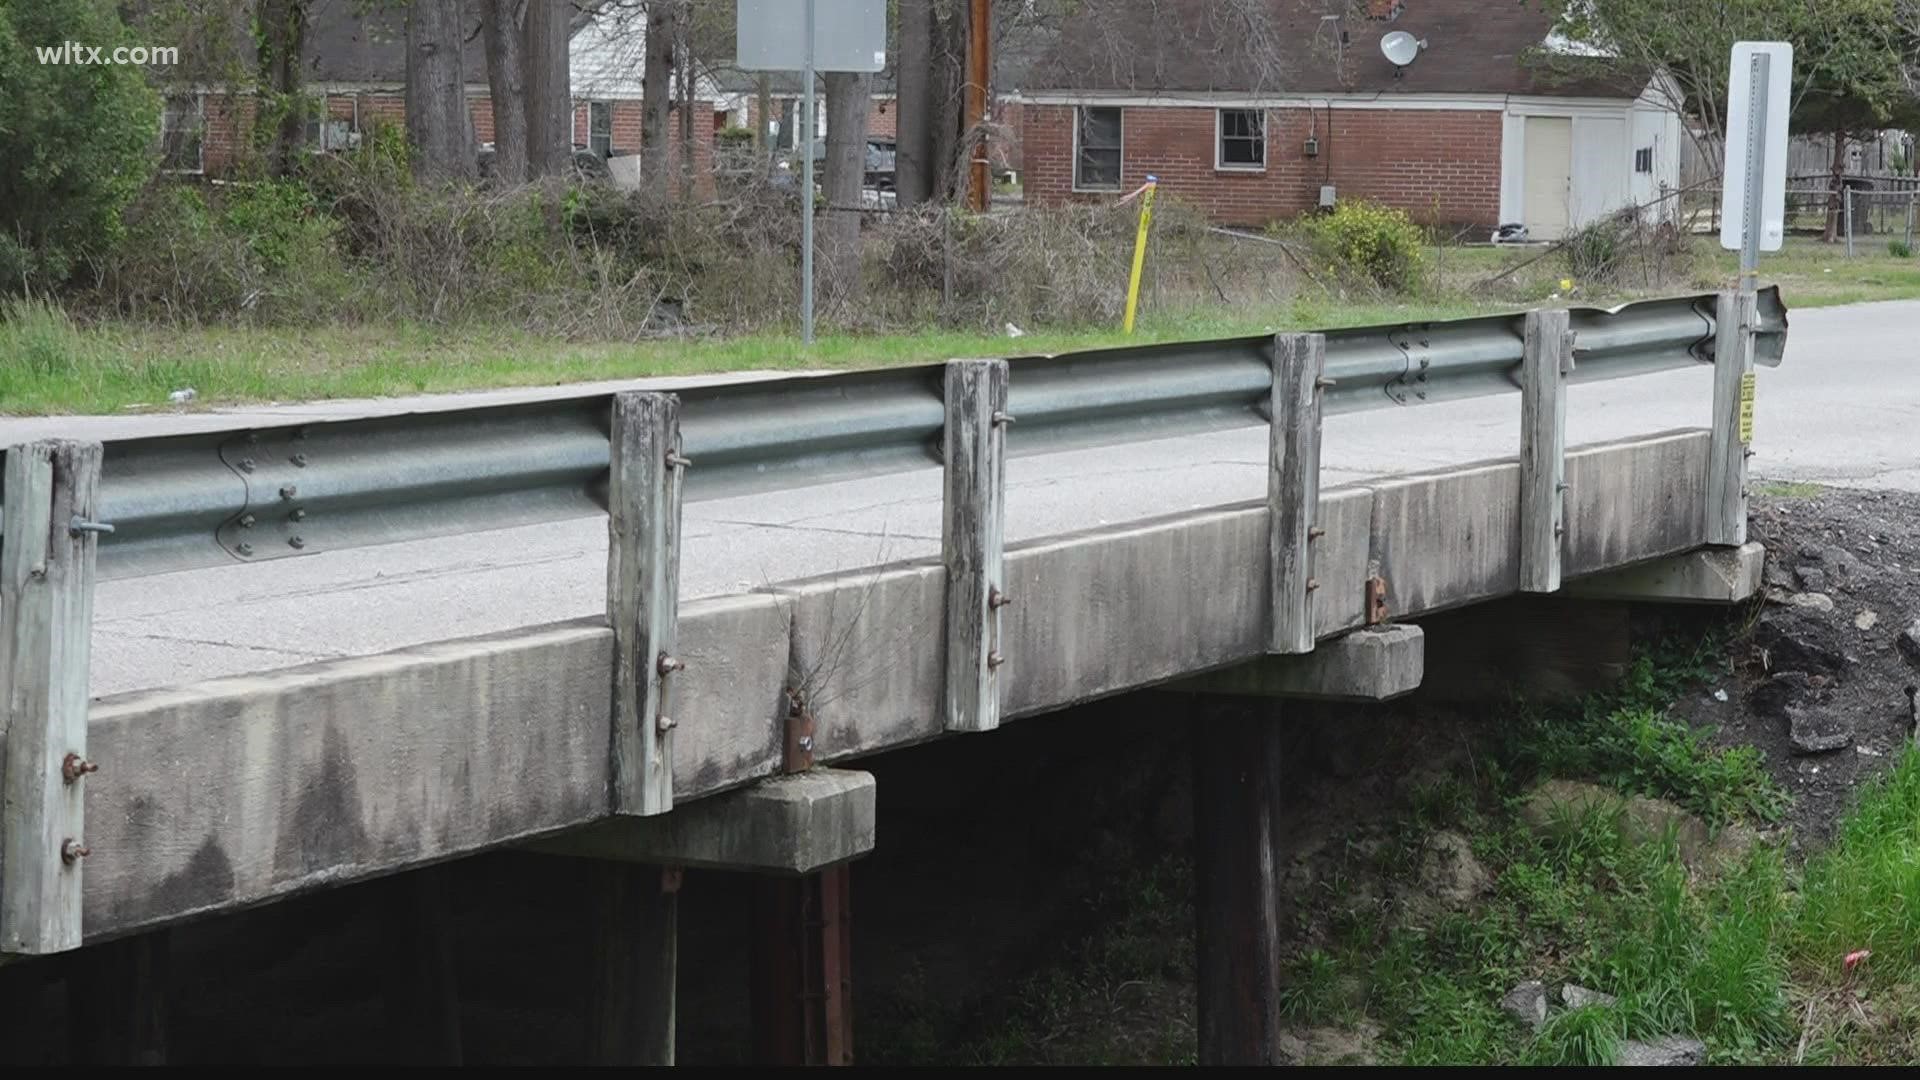 The plan is to replace the Hauser Street bridge over Turkey Creek and the Miller Road bridge over Shot Pouch Branch in Sumter, South Carolina.